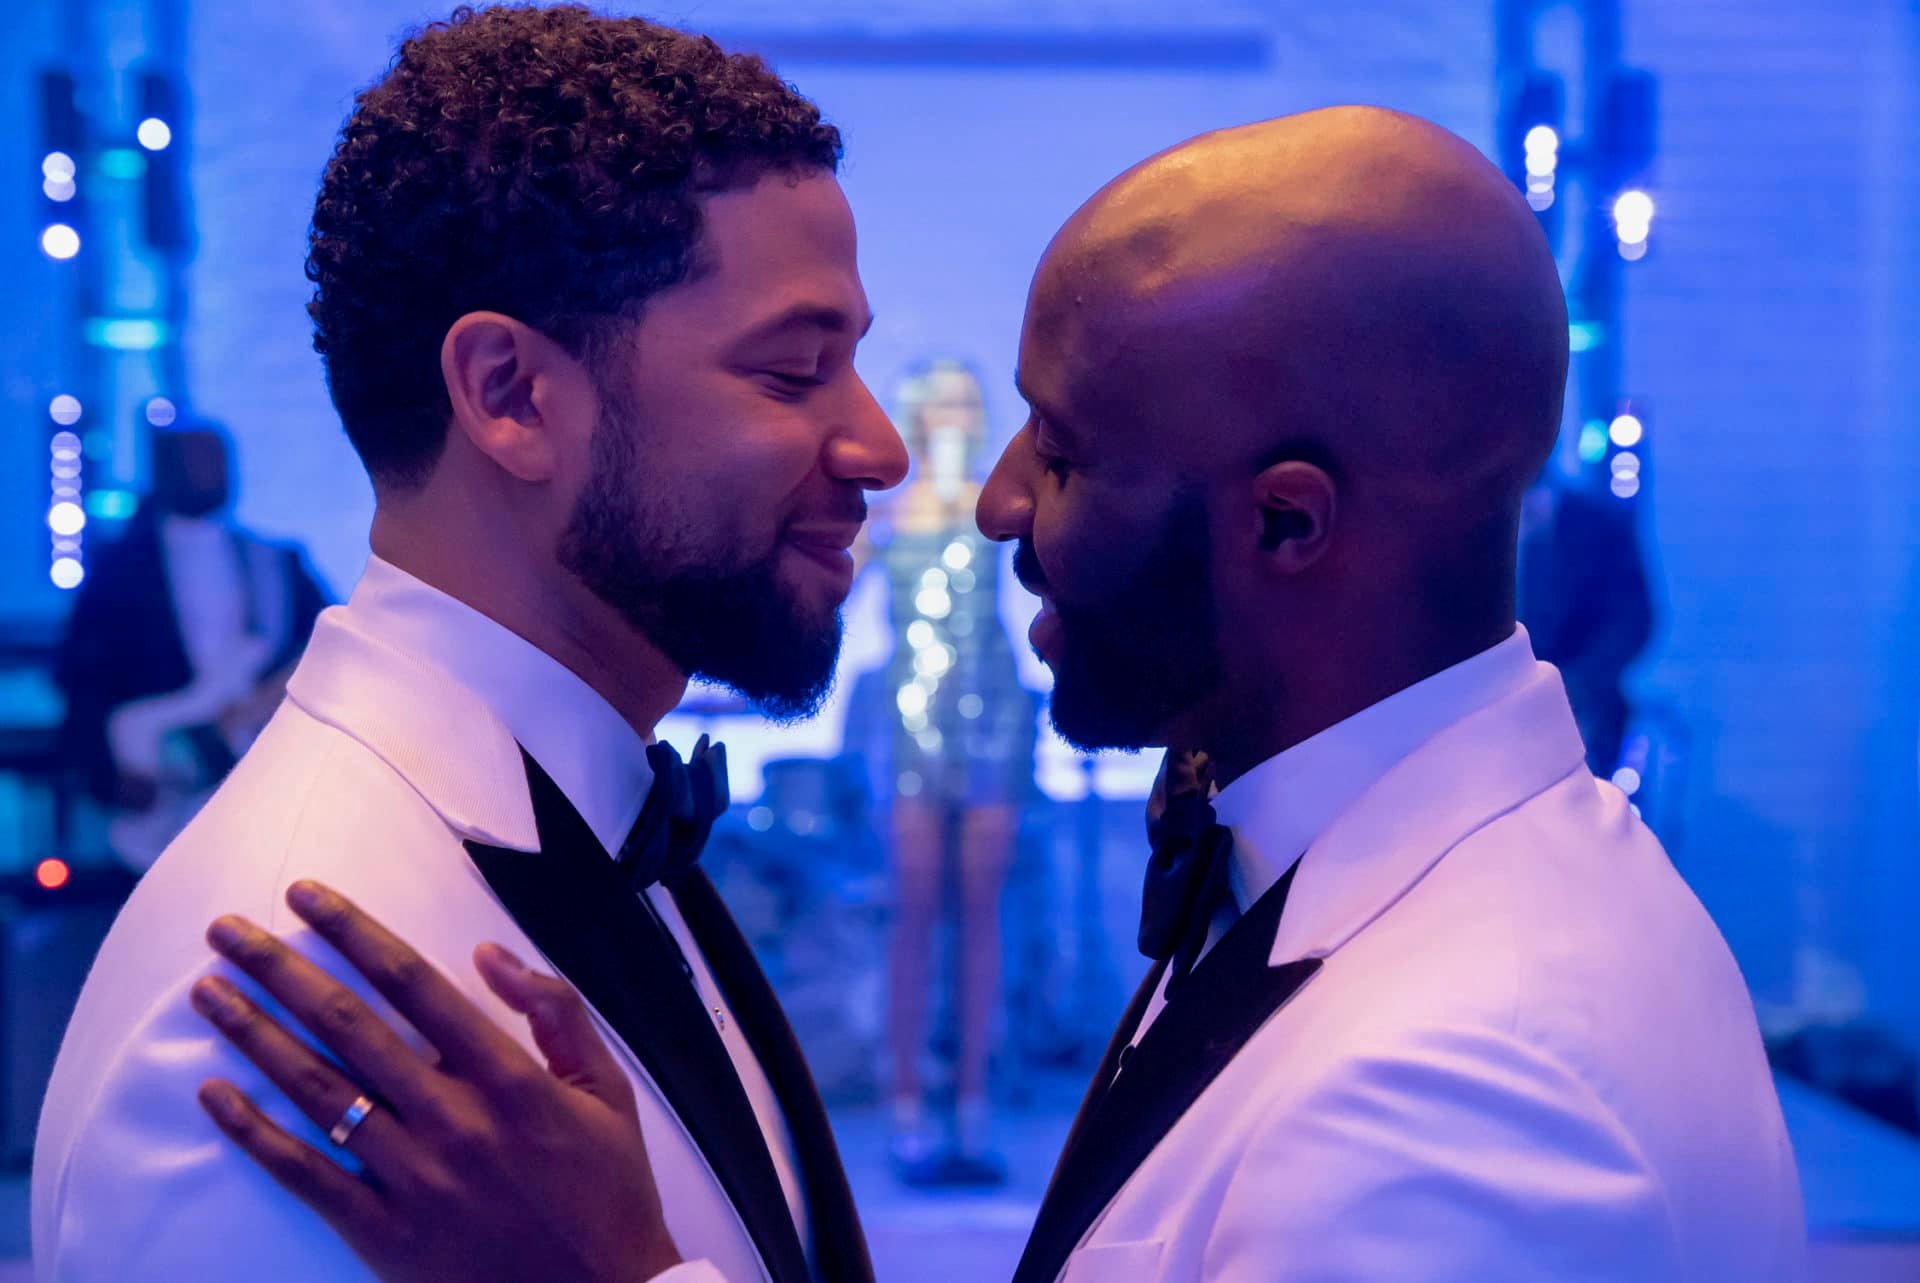 'Empire' Renewed For A Season 6 Without Jussie Smollett